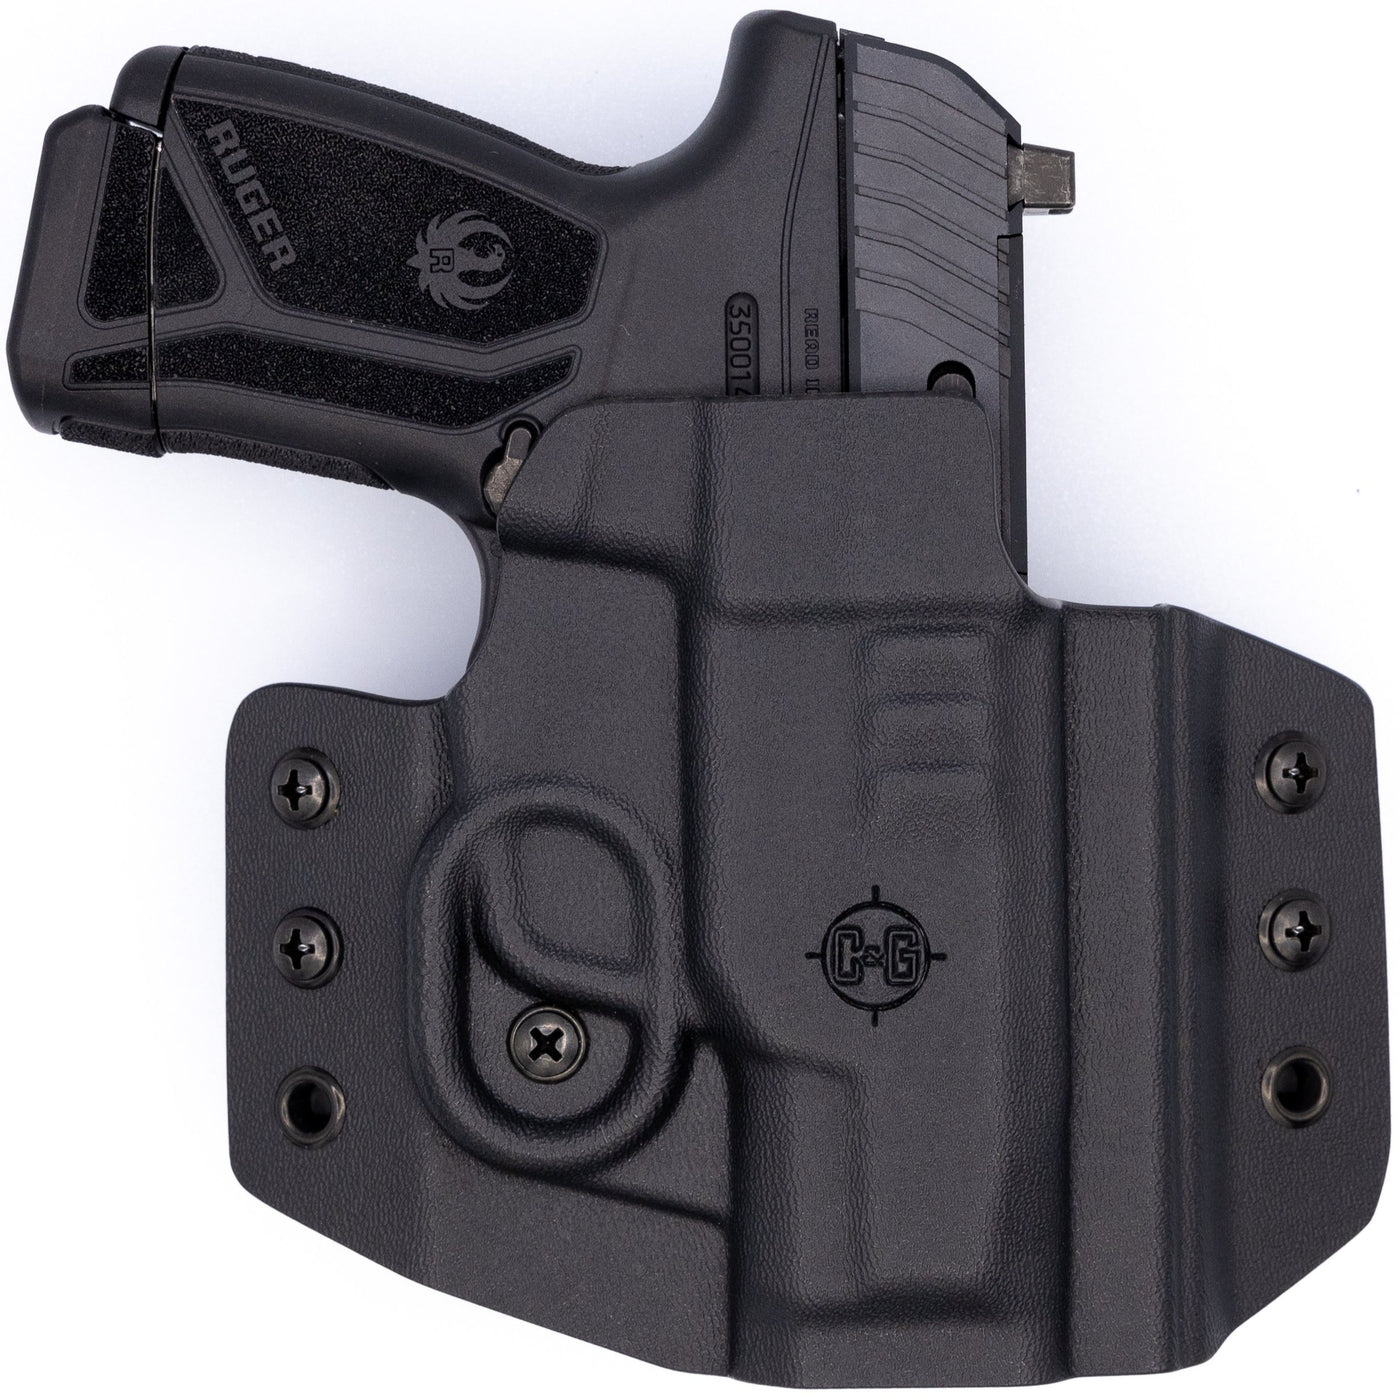 C&G Holsters OWB Covert Quickship for the Ruger MAX-9